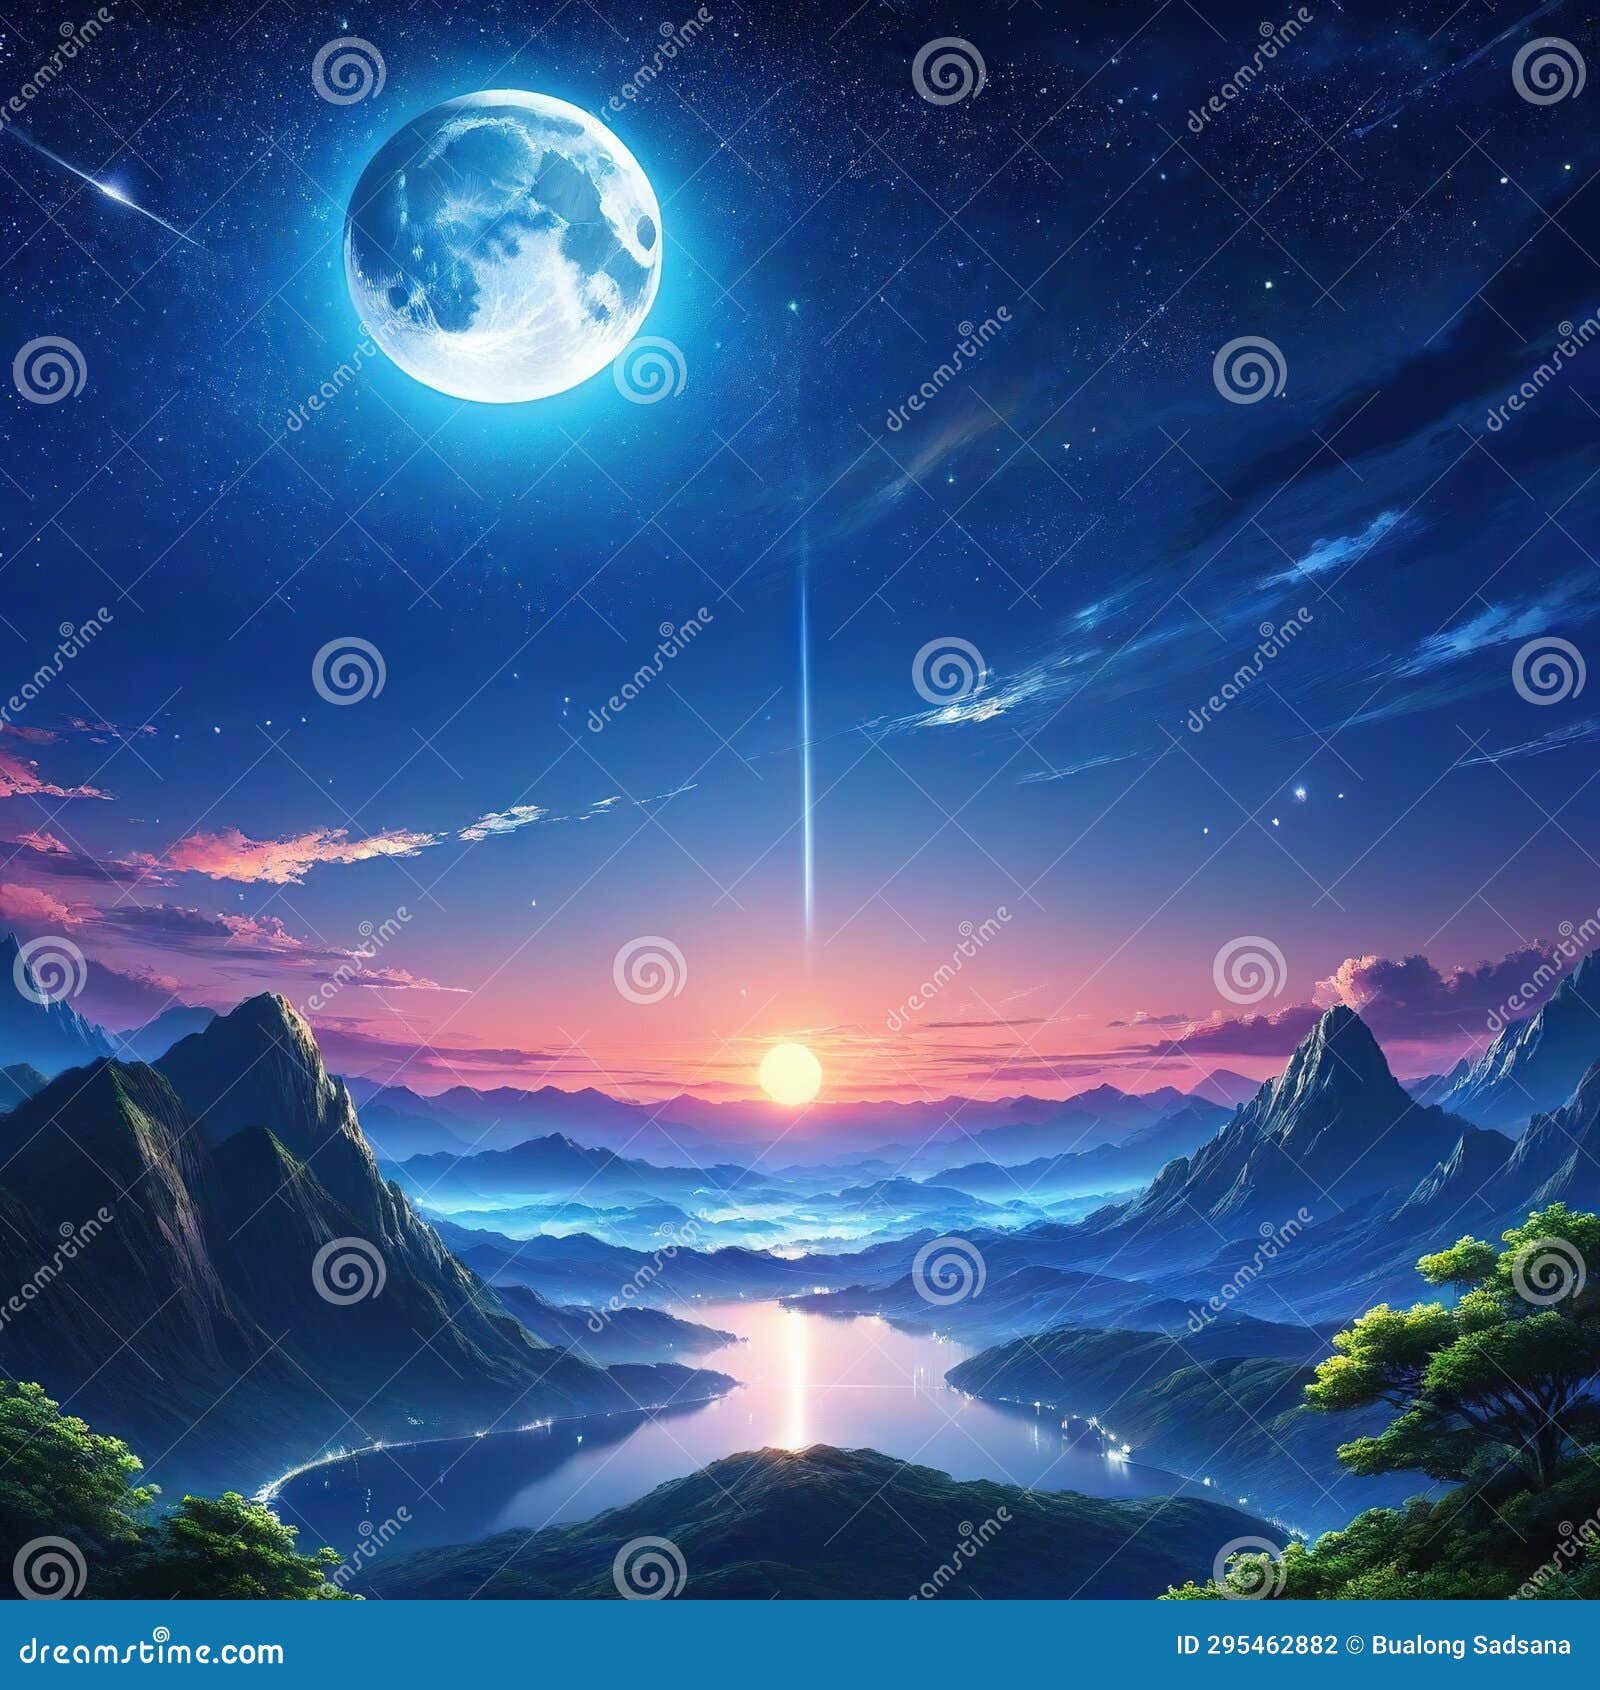 Anime Sky Art Wallpaper Fantasy Sky with Beautiful Star Star Falls with ...